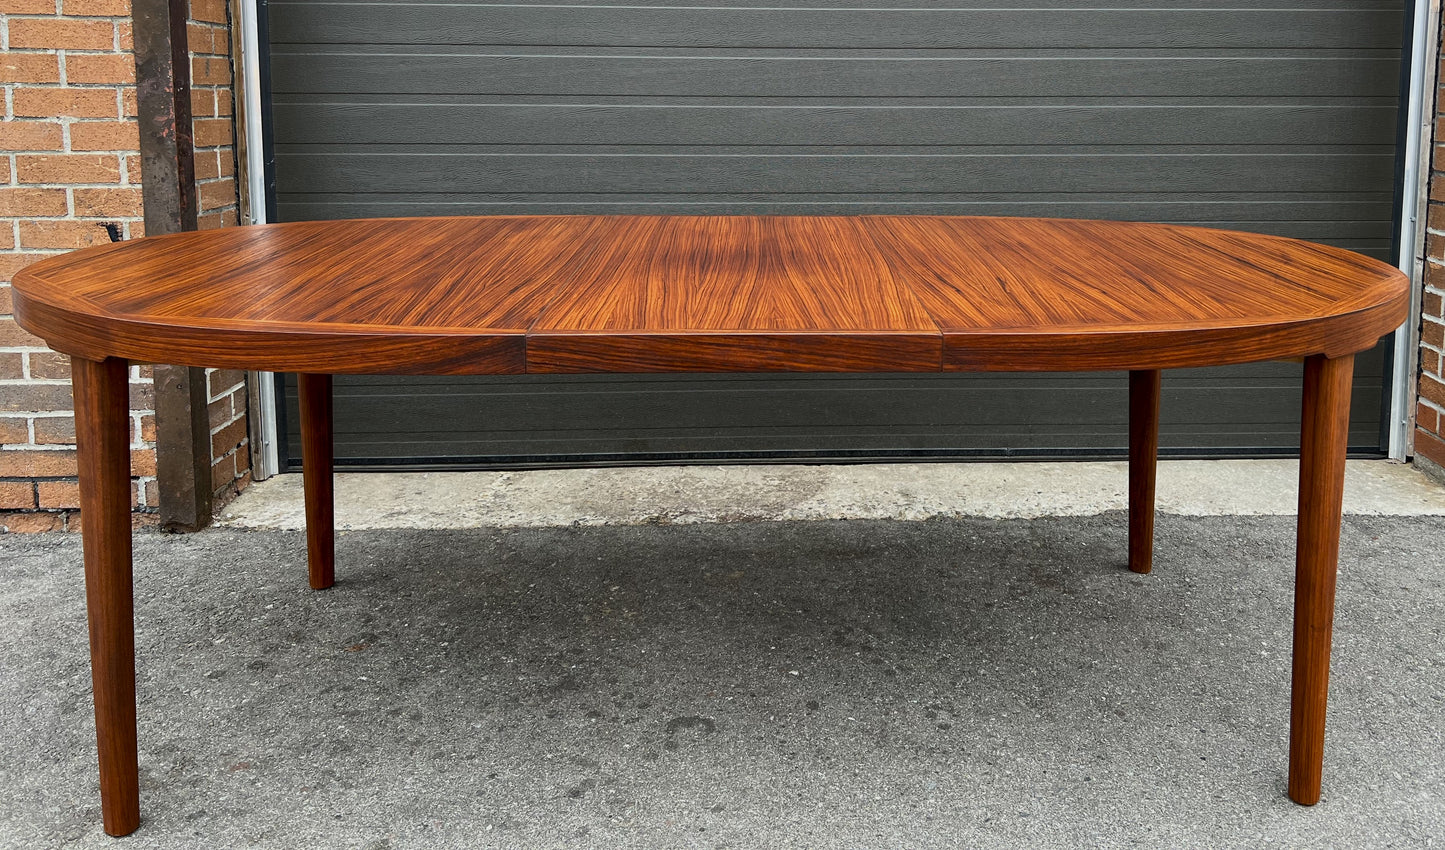 REFINISHED Danish Mid Century Modern Rosewood Table Oval w 2 Leaves 64"- 103.5"